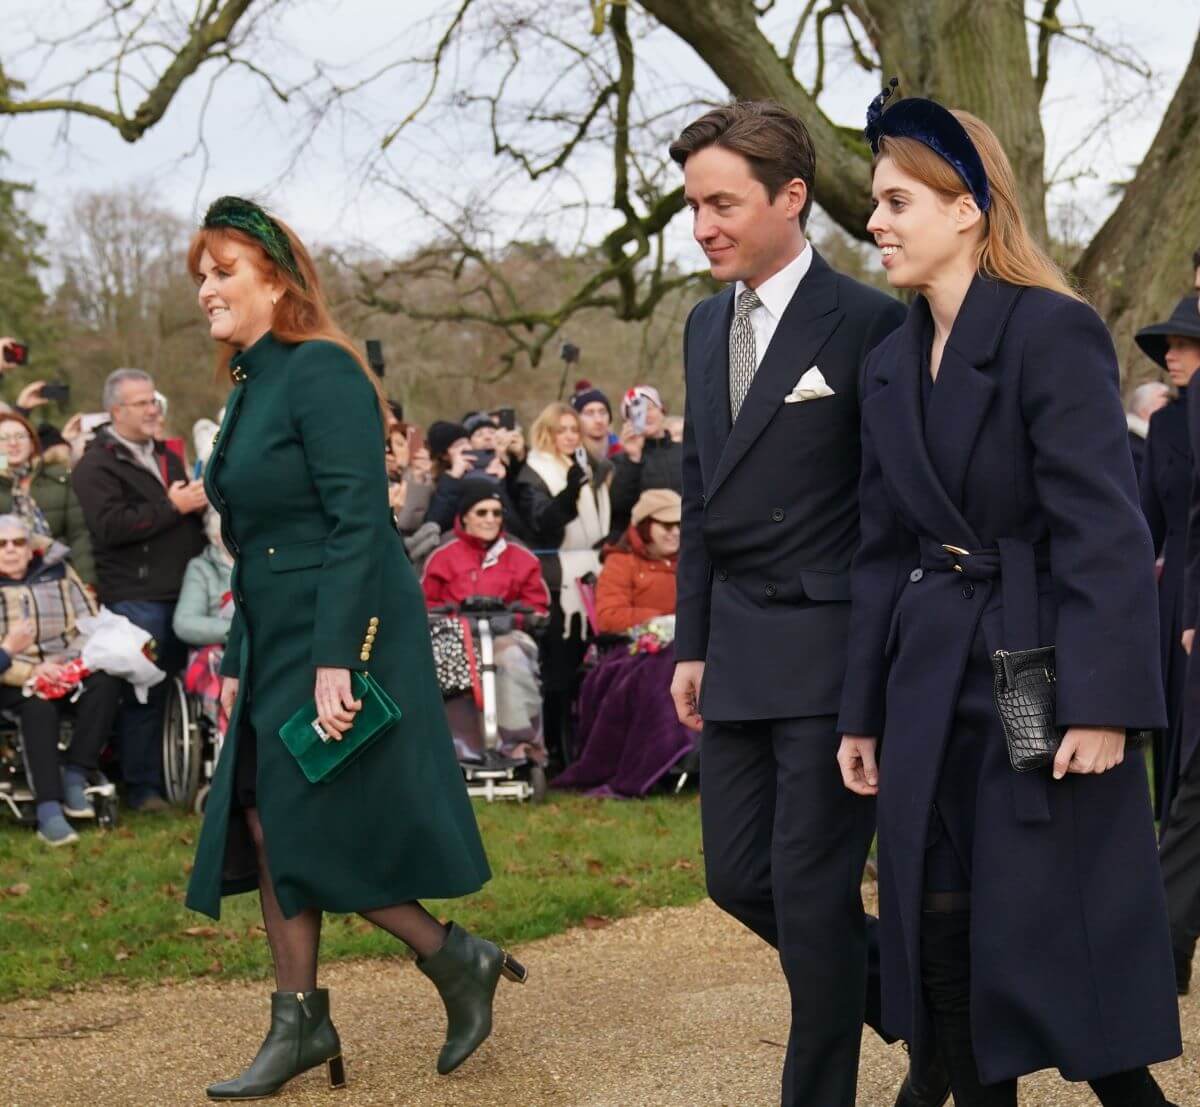 Sarah Ferguson, Princess Beatrice, and other members of the royal family attending Christmas Day morning church service in Sandringham, Norfolk